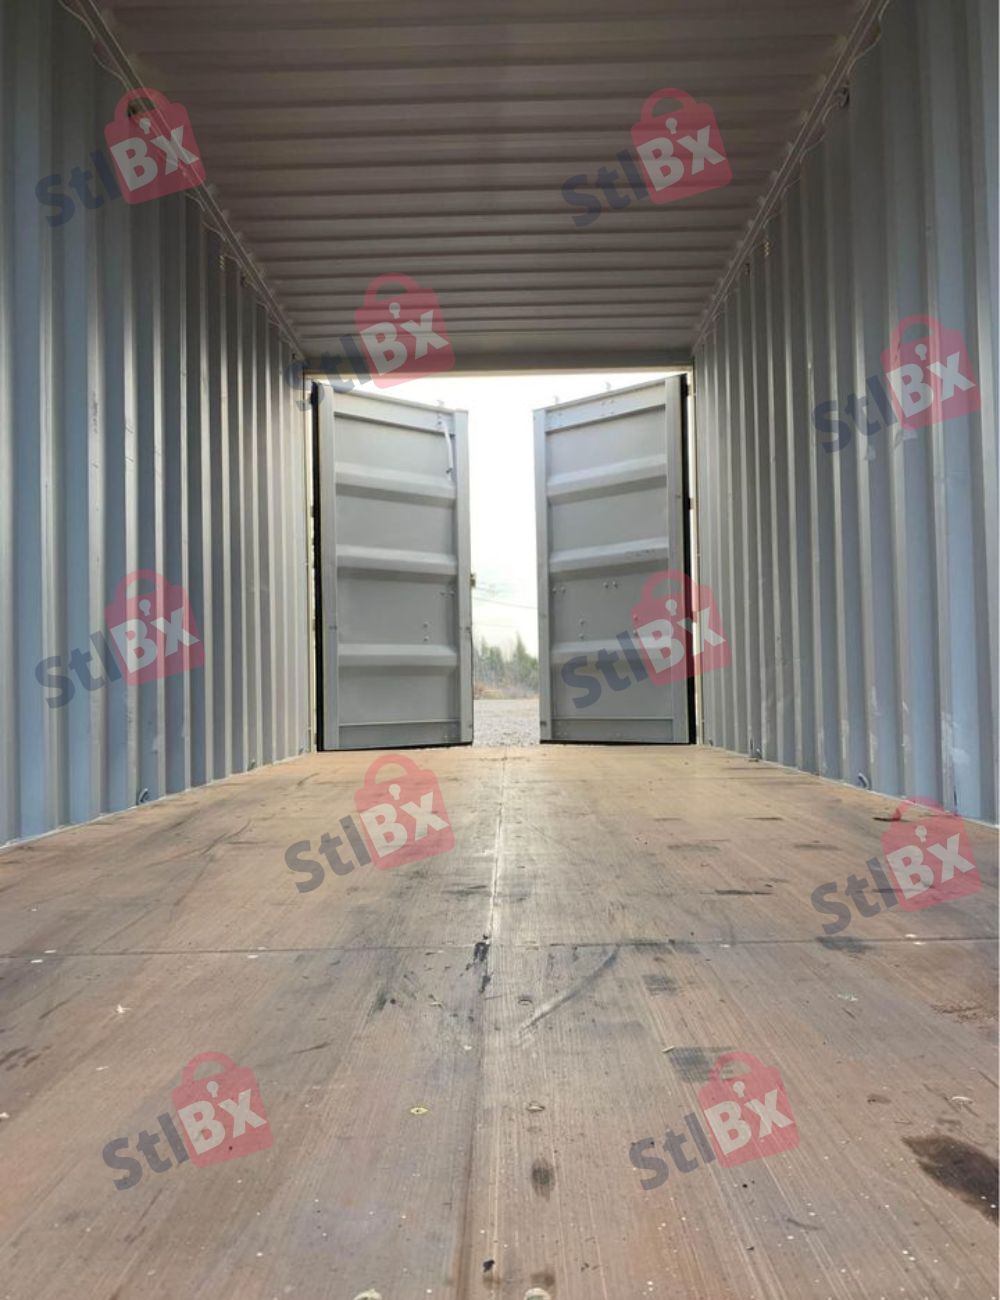 New 20-foot Shipping Container with Double Doors in Ottawa, Ontario